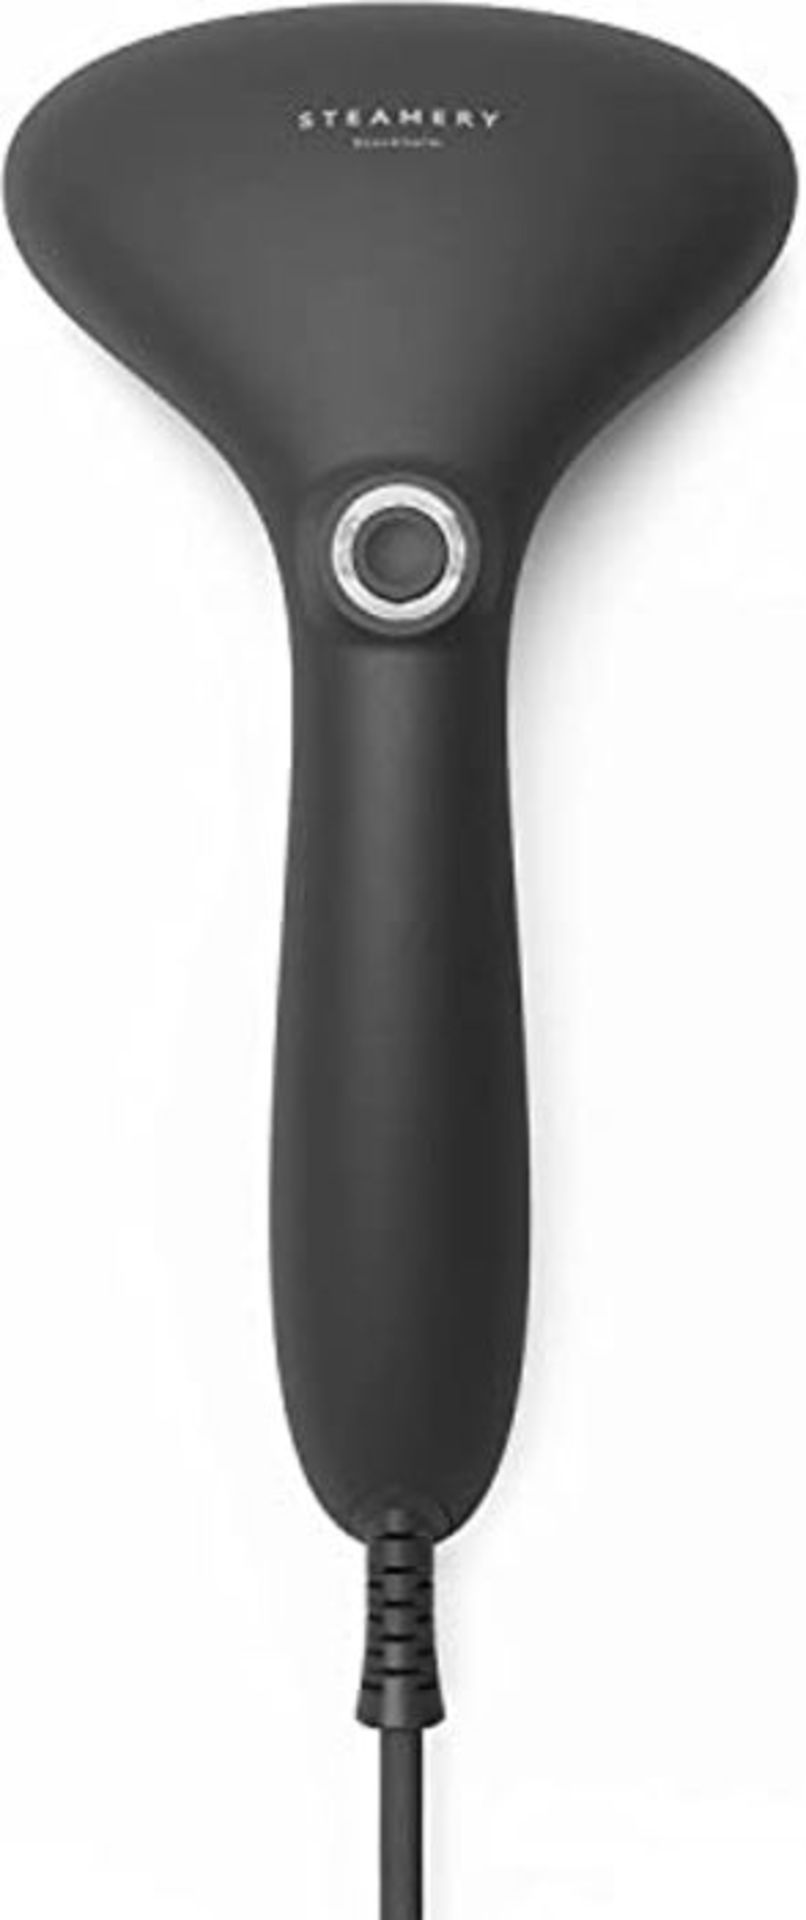 RRP £88.00 Steamery Handheld Clothes Steamer Cirrus 2, 1500W, UK Plug, Stainless Steel Mouthpiece